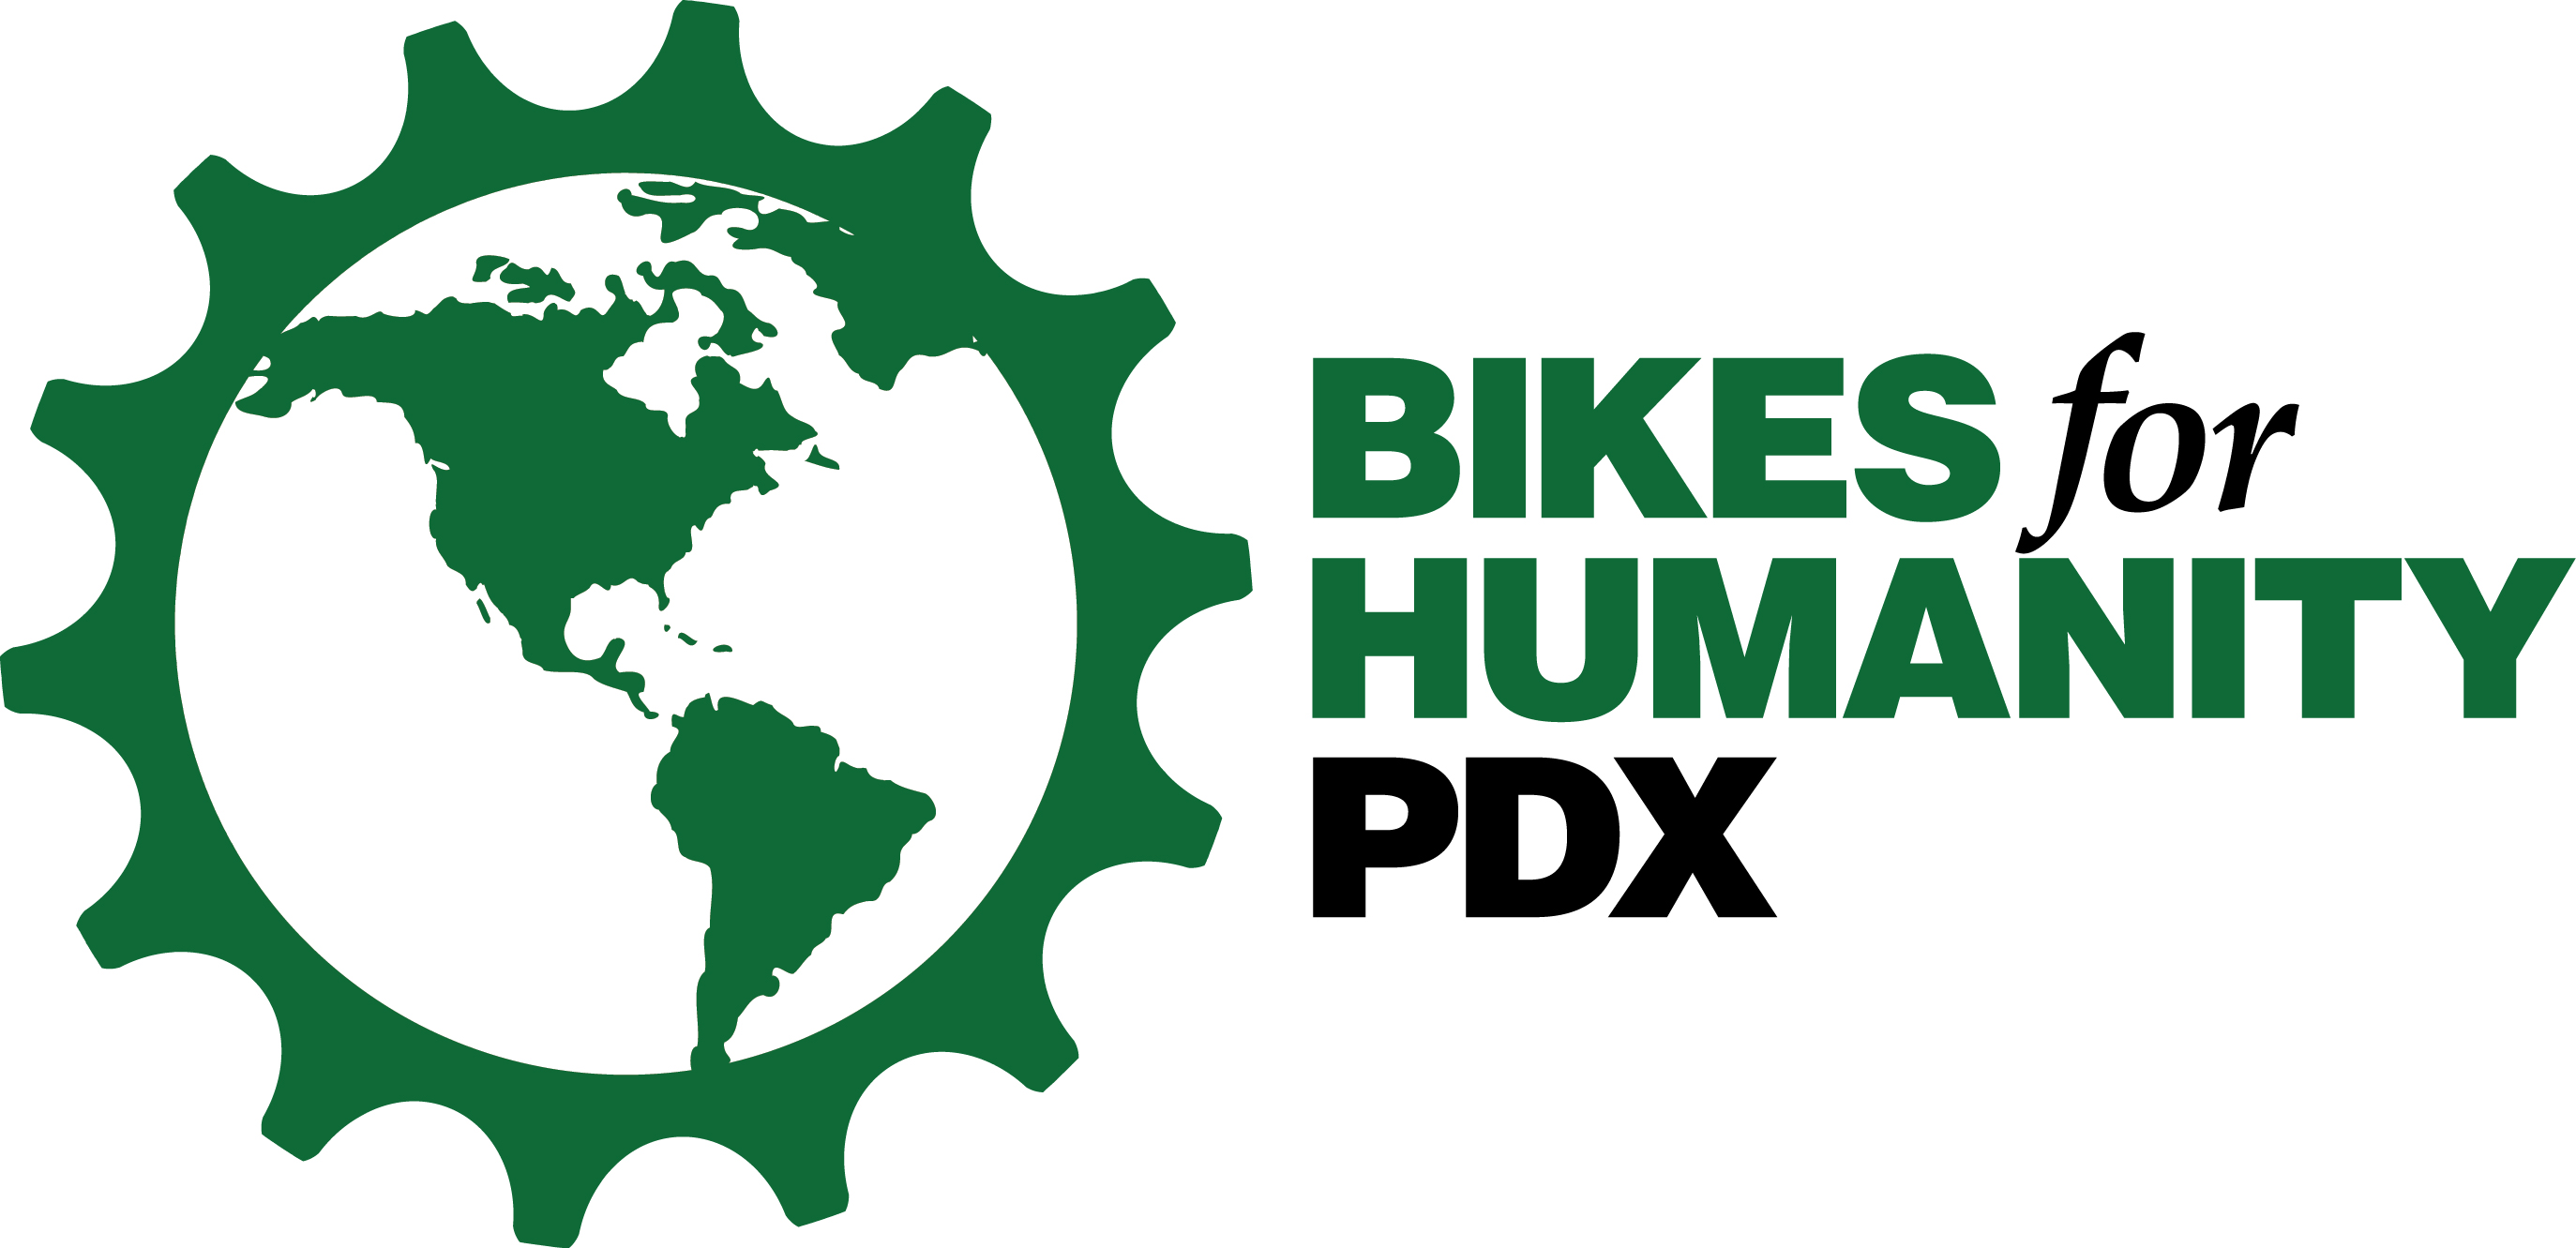 Bikes for Humanity PDX logo